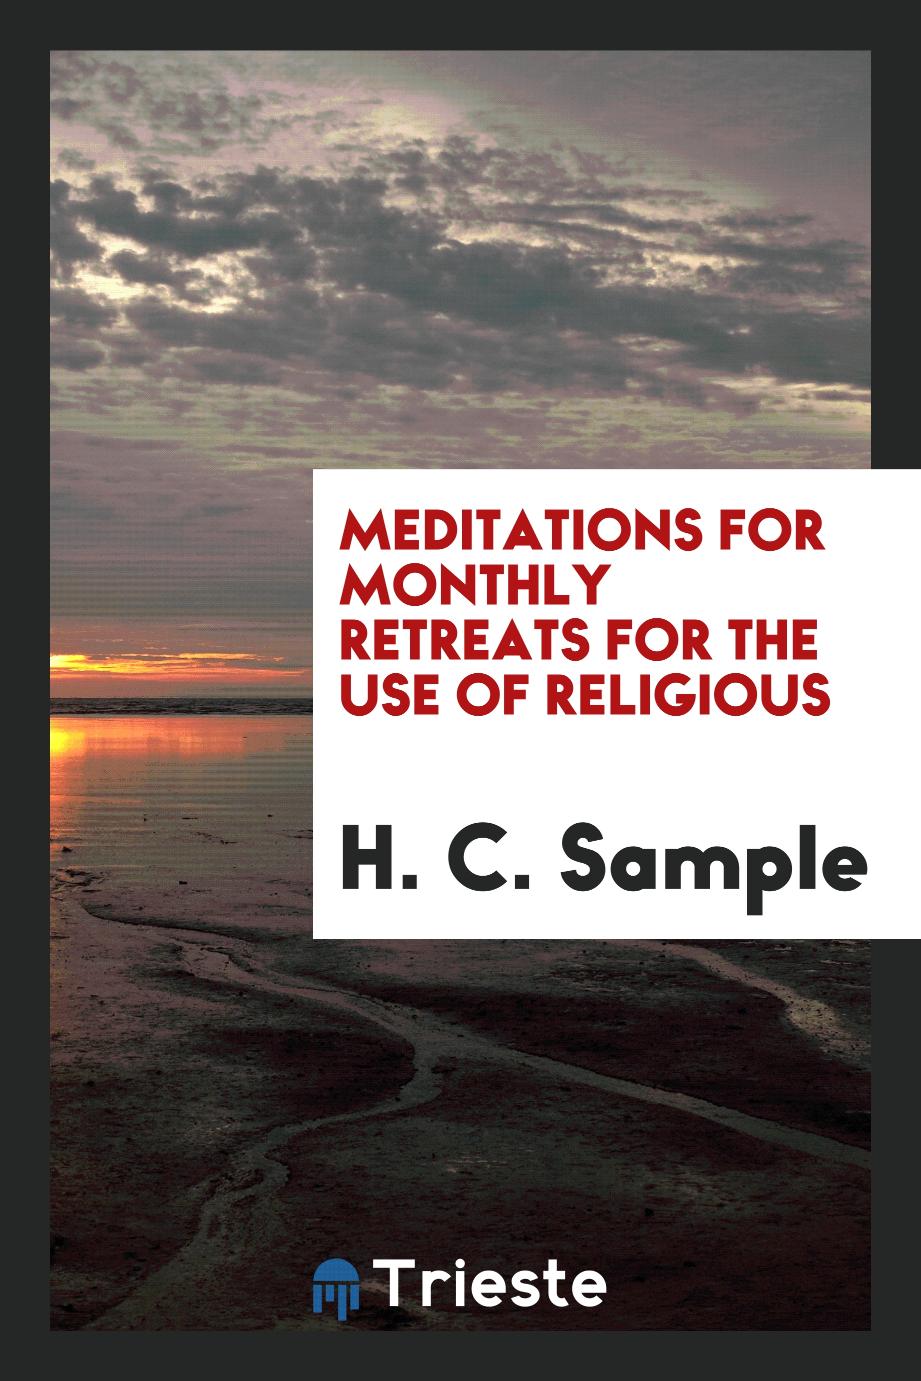 Meditations for monthly retreats for the use of religious